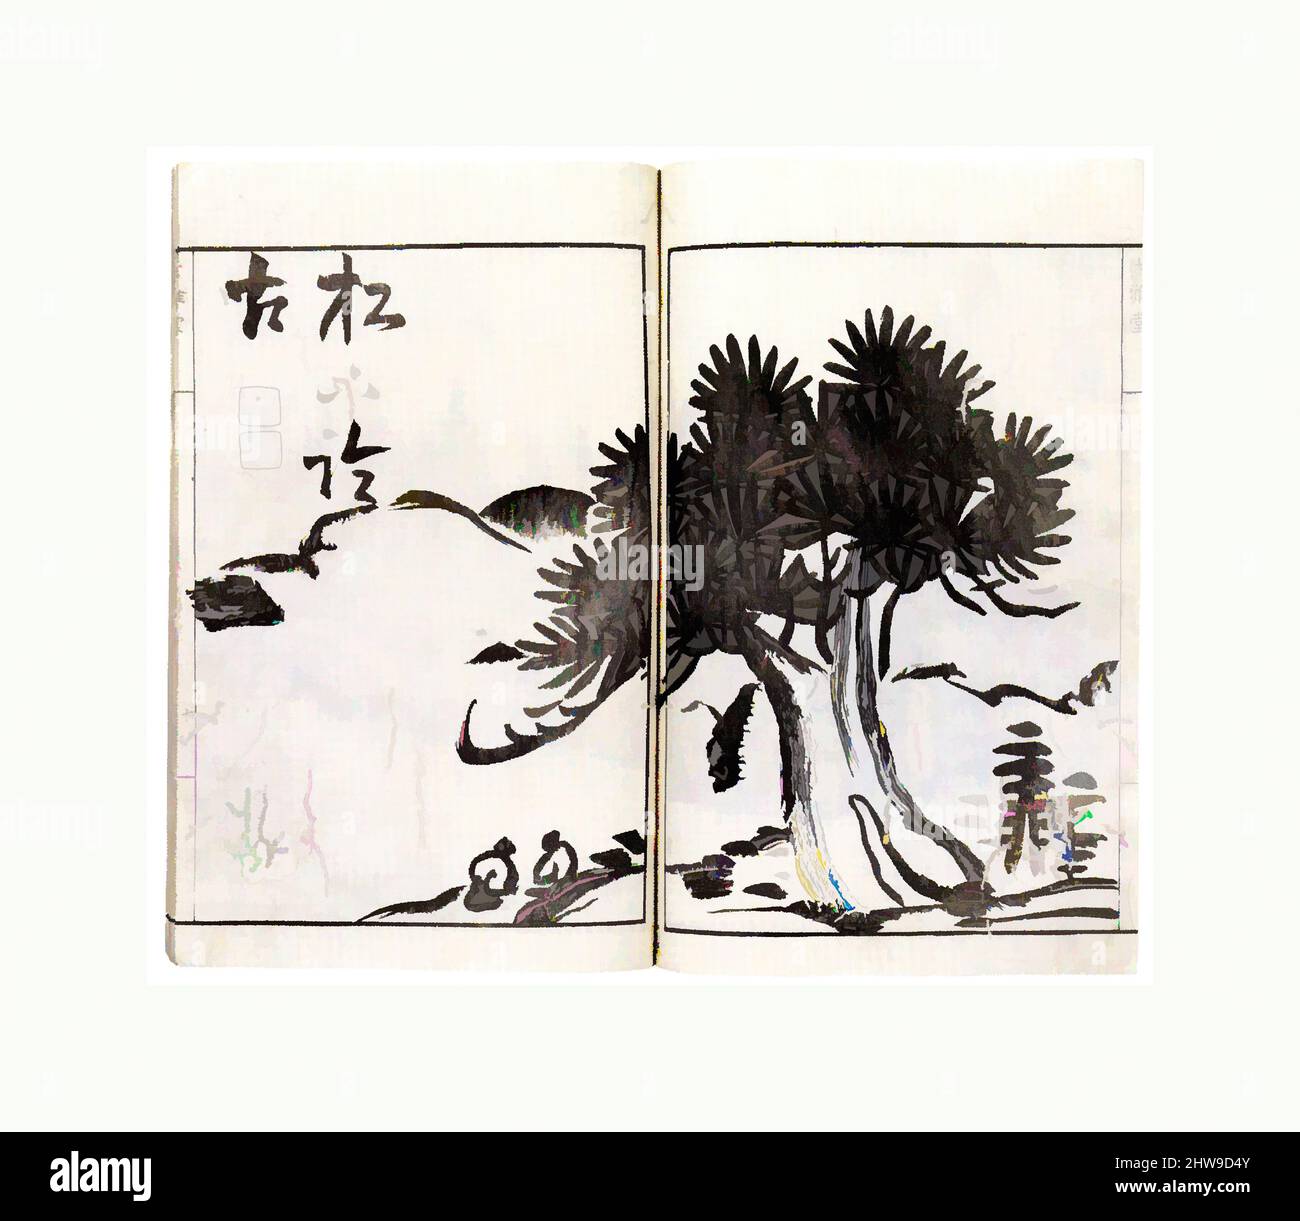 Art inspired by Ike Taiga gafu (Paintings of Ike no Taiga); I Fukyu, Edo period (1615–1868), 1803, Japan, Two woodblock printed books; ink on paper, Each book 10 1/2 × 7 1/4 in. (26.7 × 18.4 cm), Illustrated Books, Nakagawa Tenju (Japanese, died 1795, Classic works modernized by Artotop with a splash of modernity. Shapes, color and value, eye-catching visual impact on art. Emotions through freedom of artworks in a contemporary way. A timeless message pursuing a wildly creative new direction. Artists turning to the digital medium and creating the Artotop NFT Stock Photo